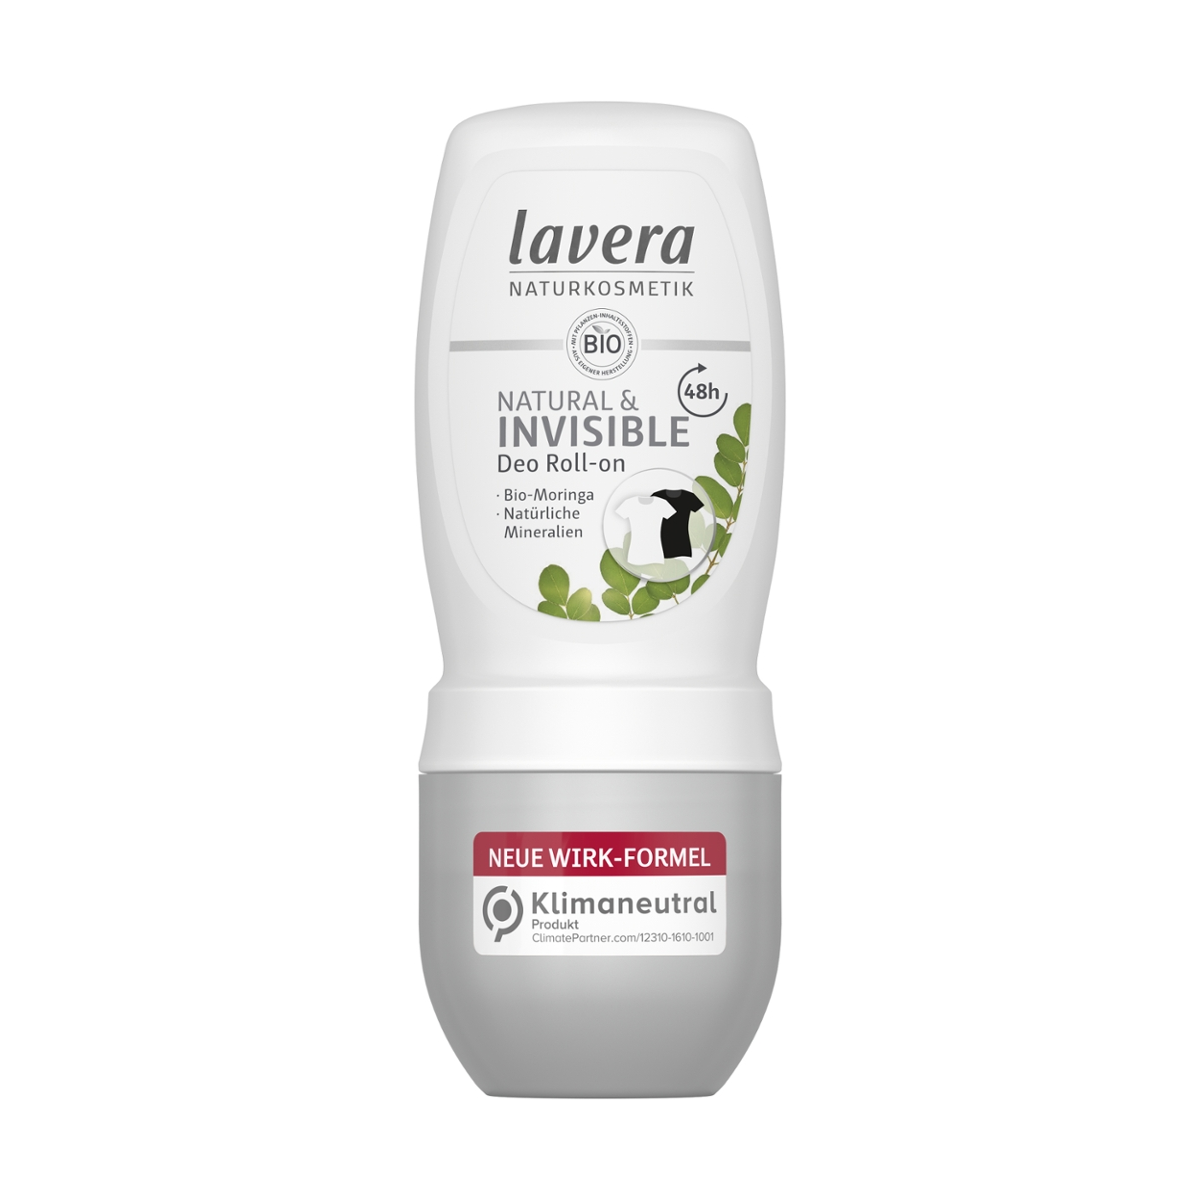 Lavera - 24h Deo Roll-on Natural & Invisible